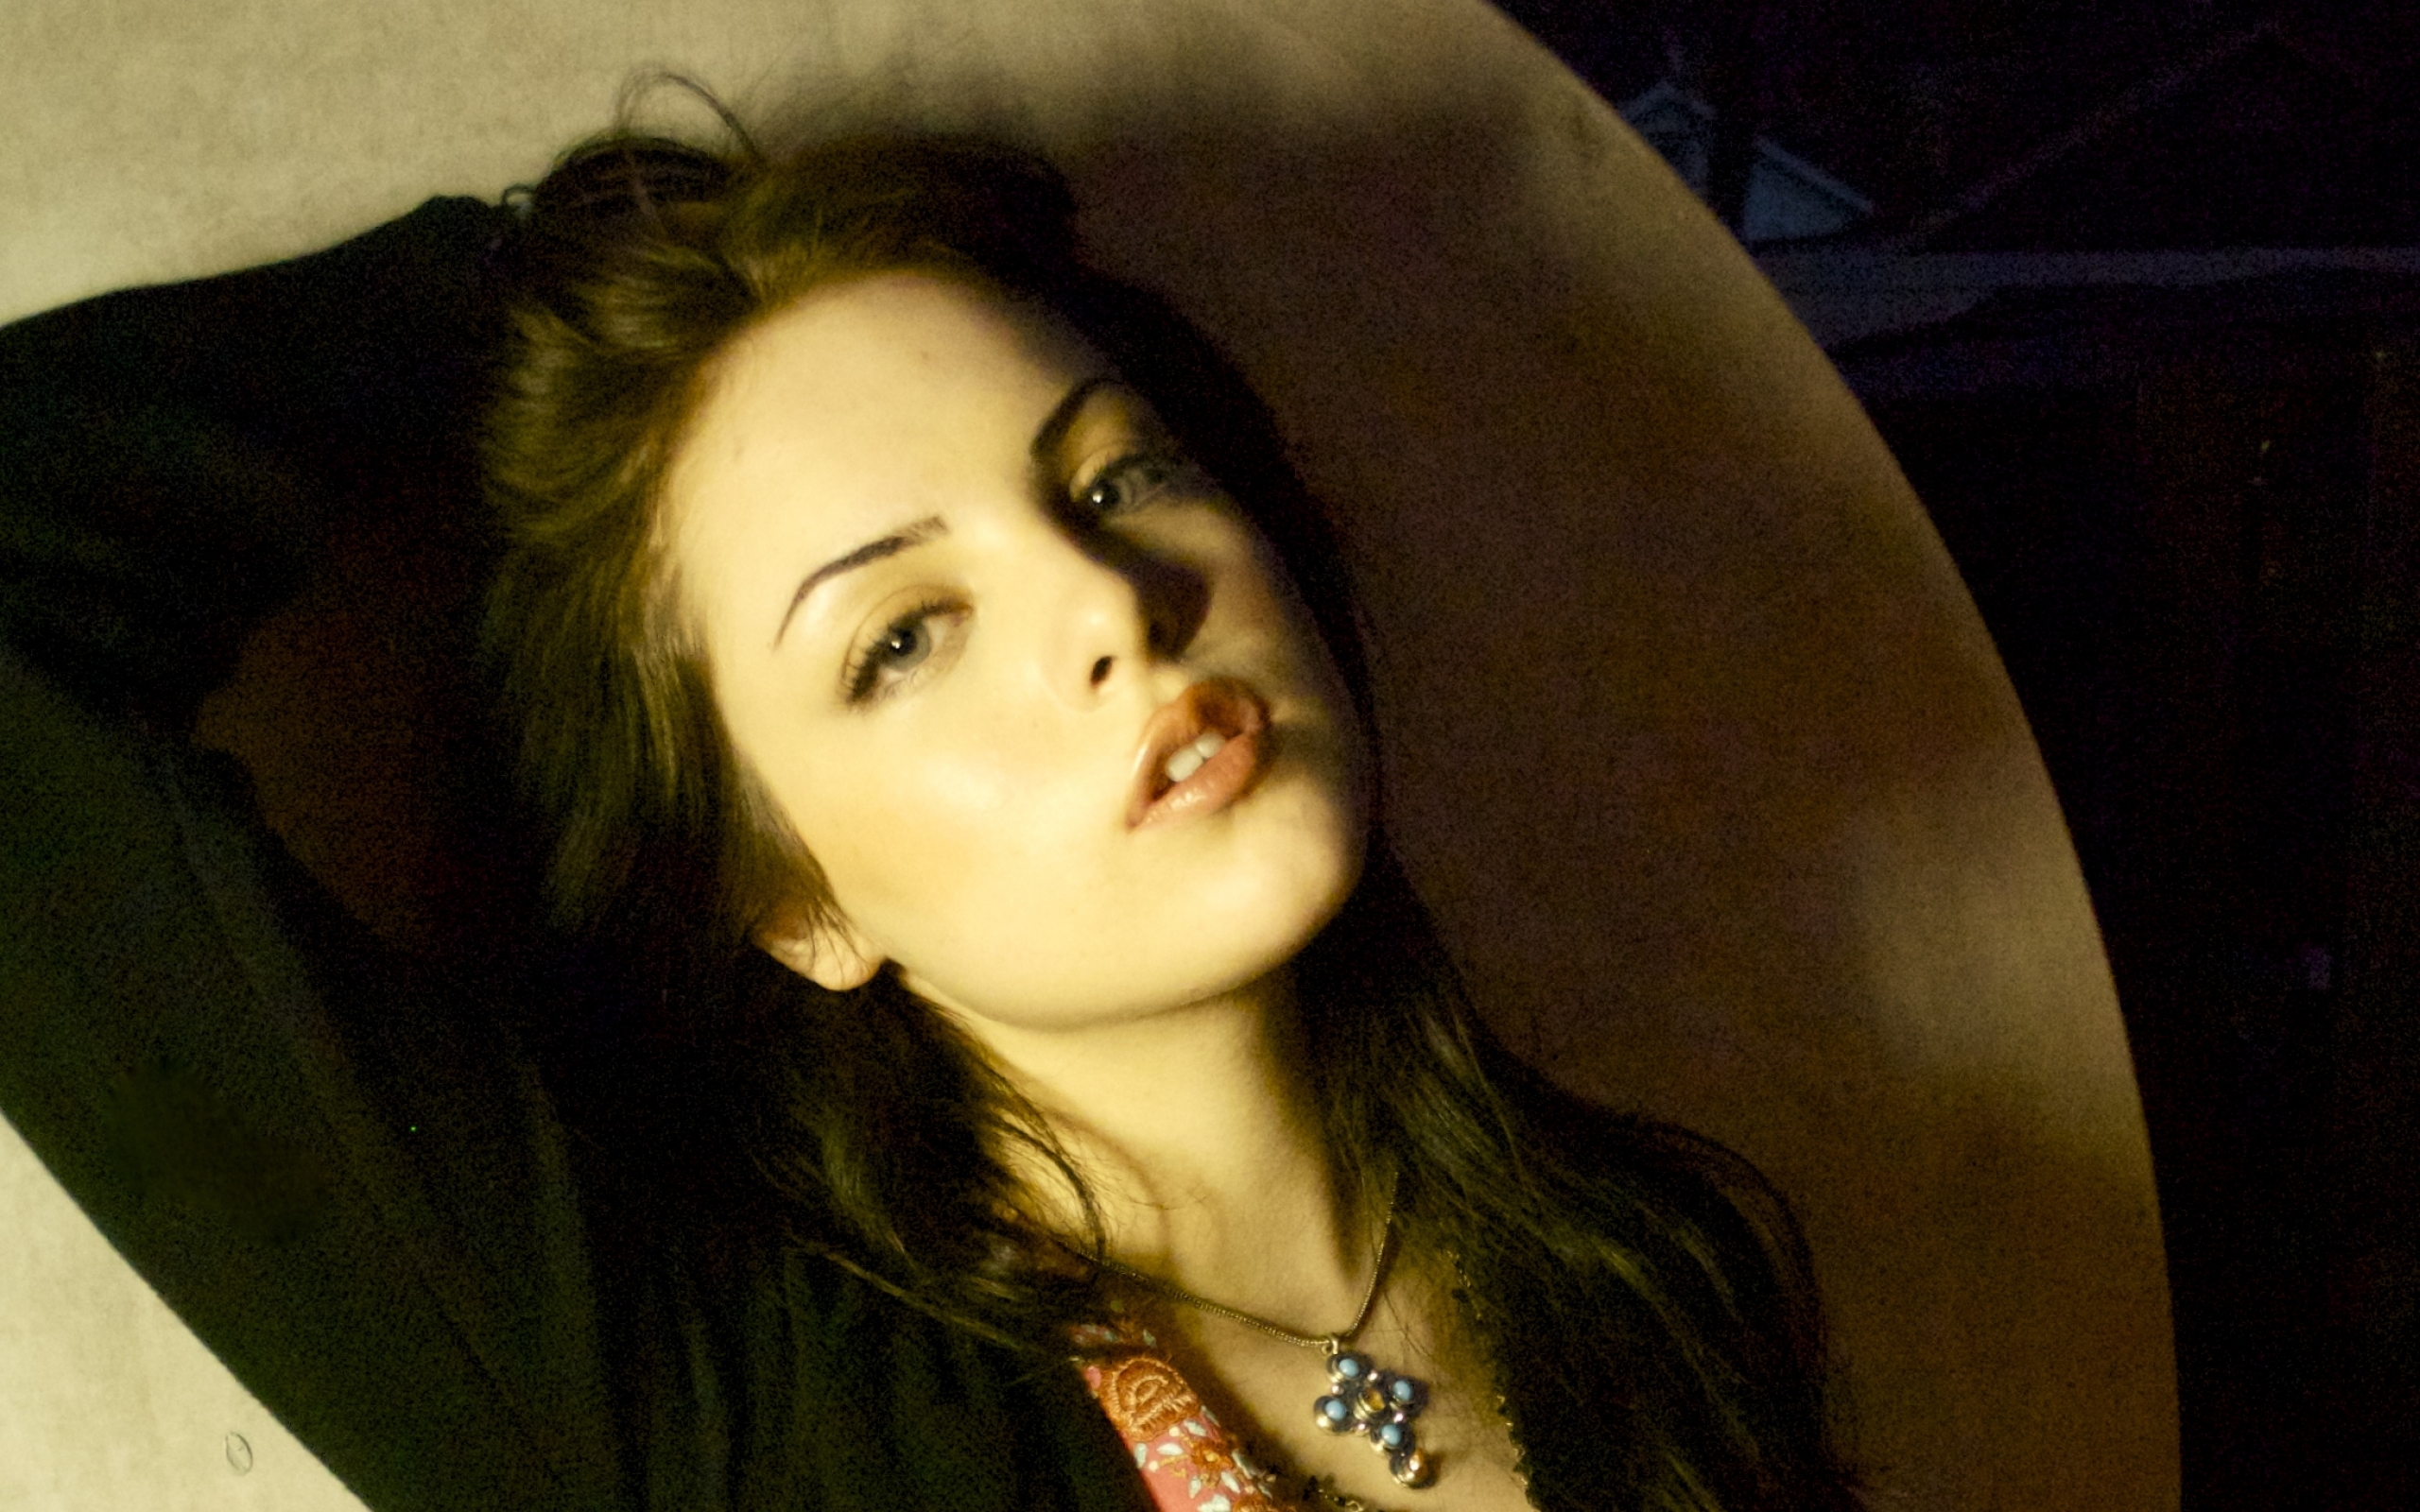 Elizabeth Gillies Wallpaper High Resolution And Quality